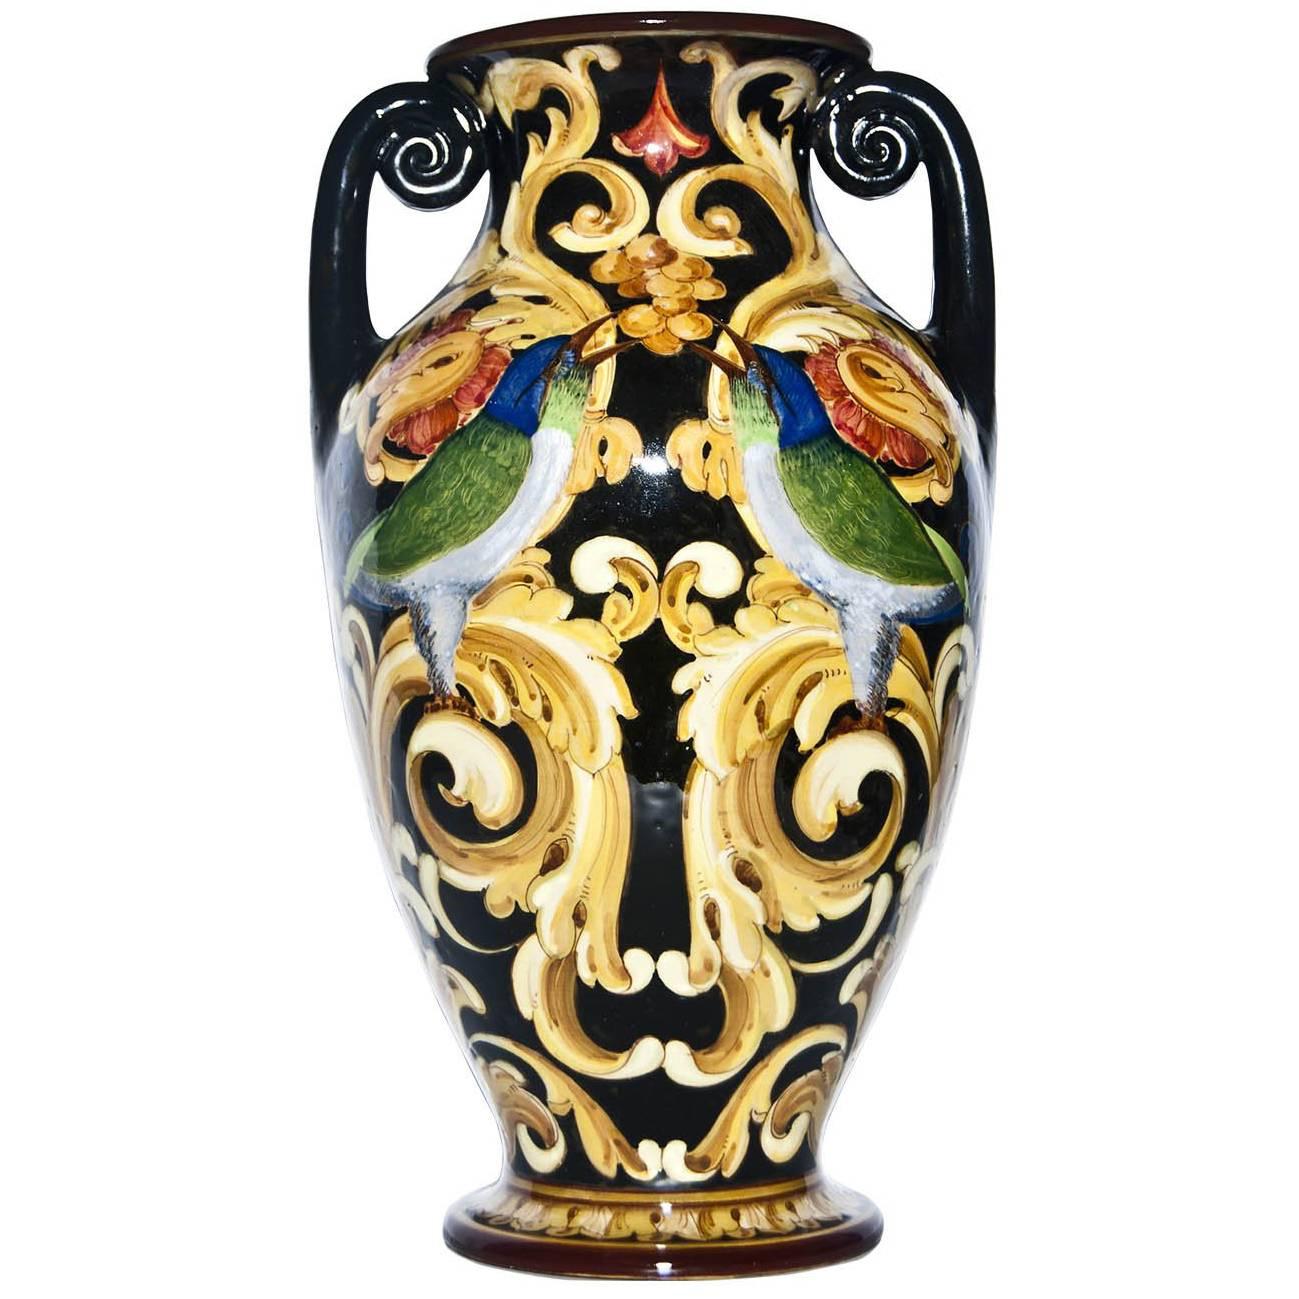 Pair of ceramic painted vases decorated with birds, grapes and floreal motif by Renato Bassanelli. 
Both signed and situated under the base: R. Bassanelli Roma.

Very good conditions.

This artwork is shipped from Italy. Under existing